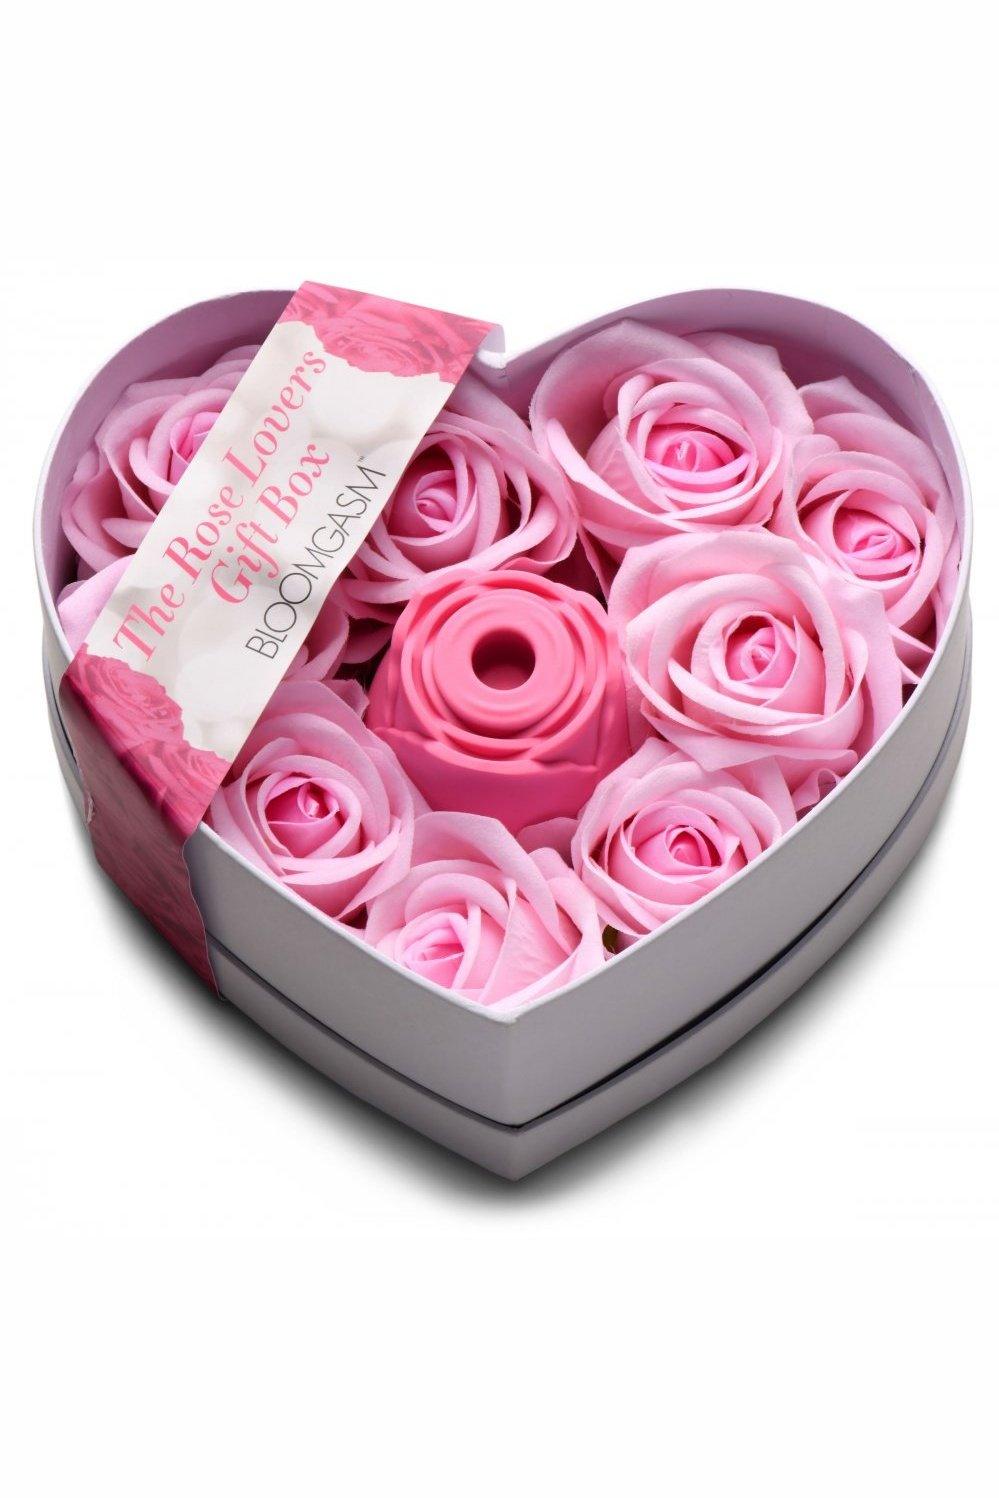 The Rose Lovers Gift Box 10x Clit Suction Rose - Pink or Red - Sex On the Go